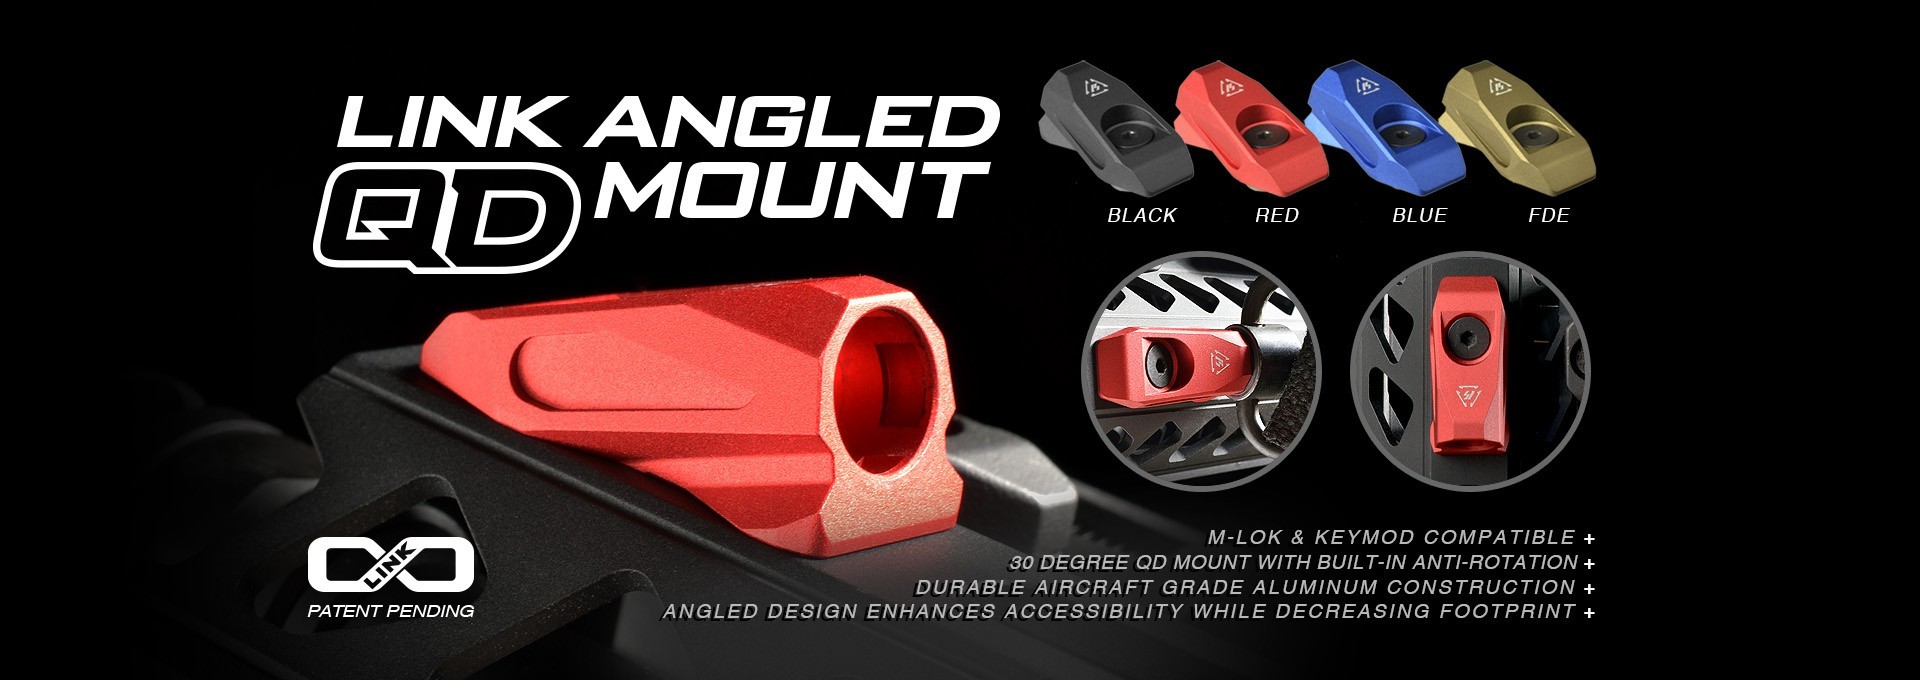 Strike Industries Link Angled QD Mount - Red | Redcon1 Tactical